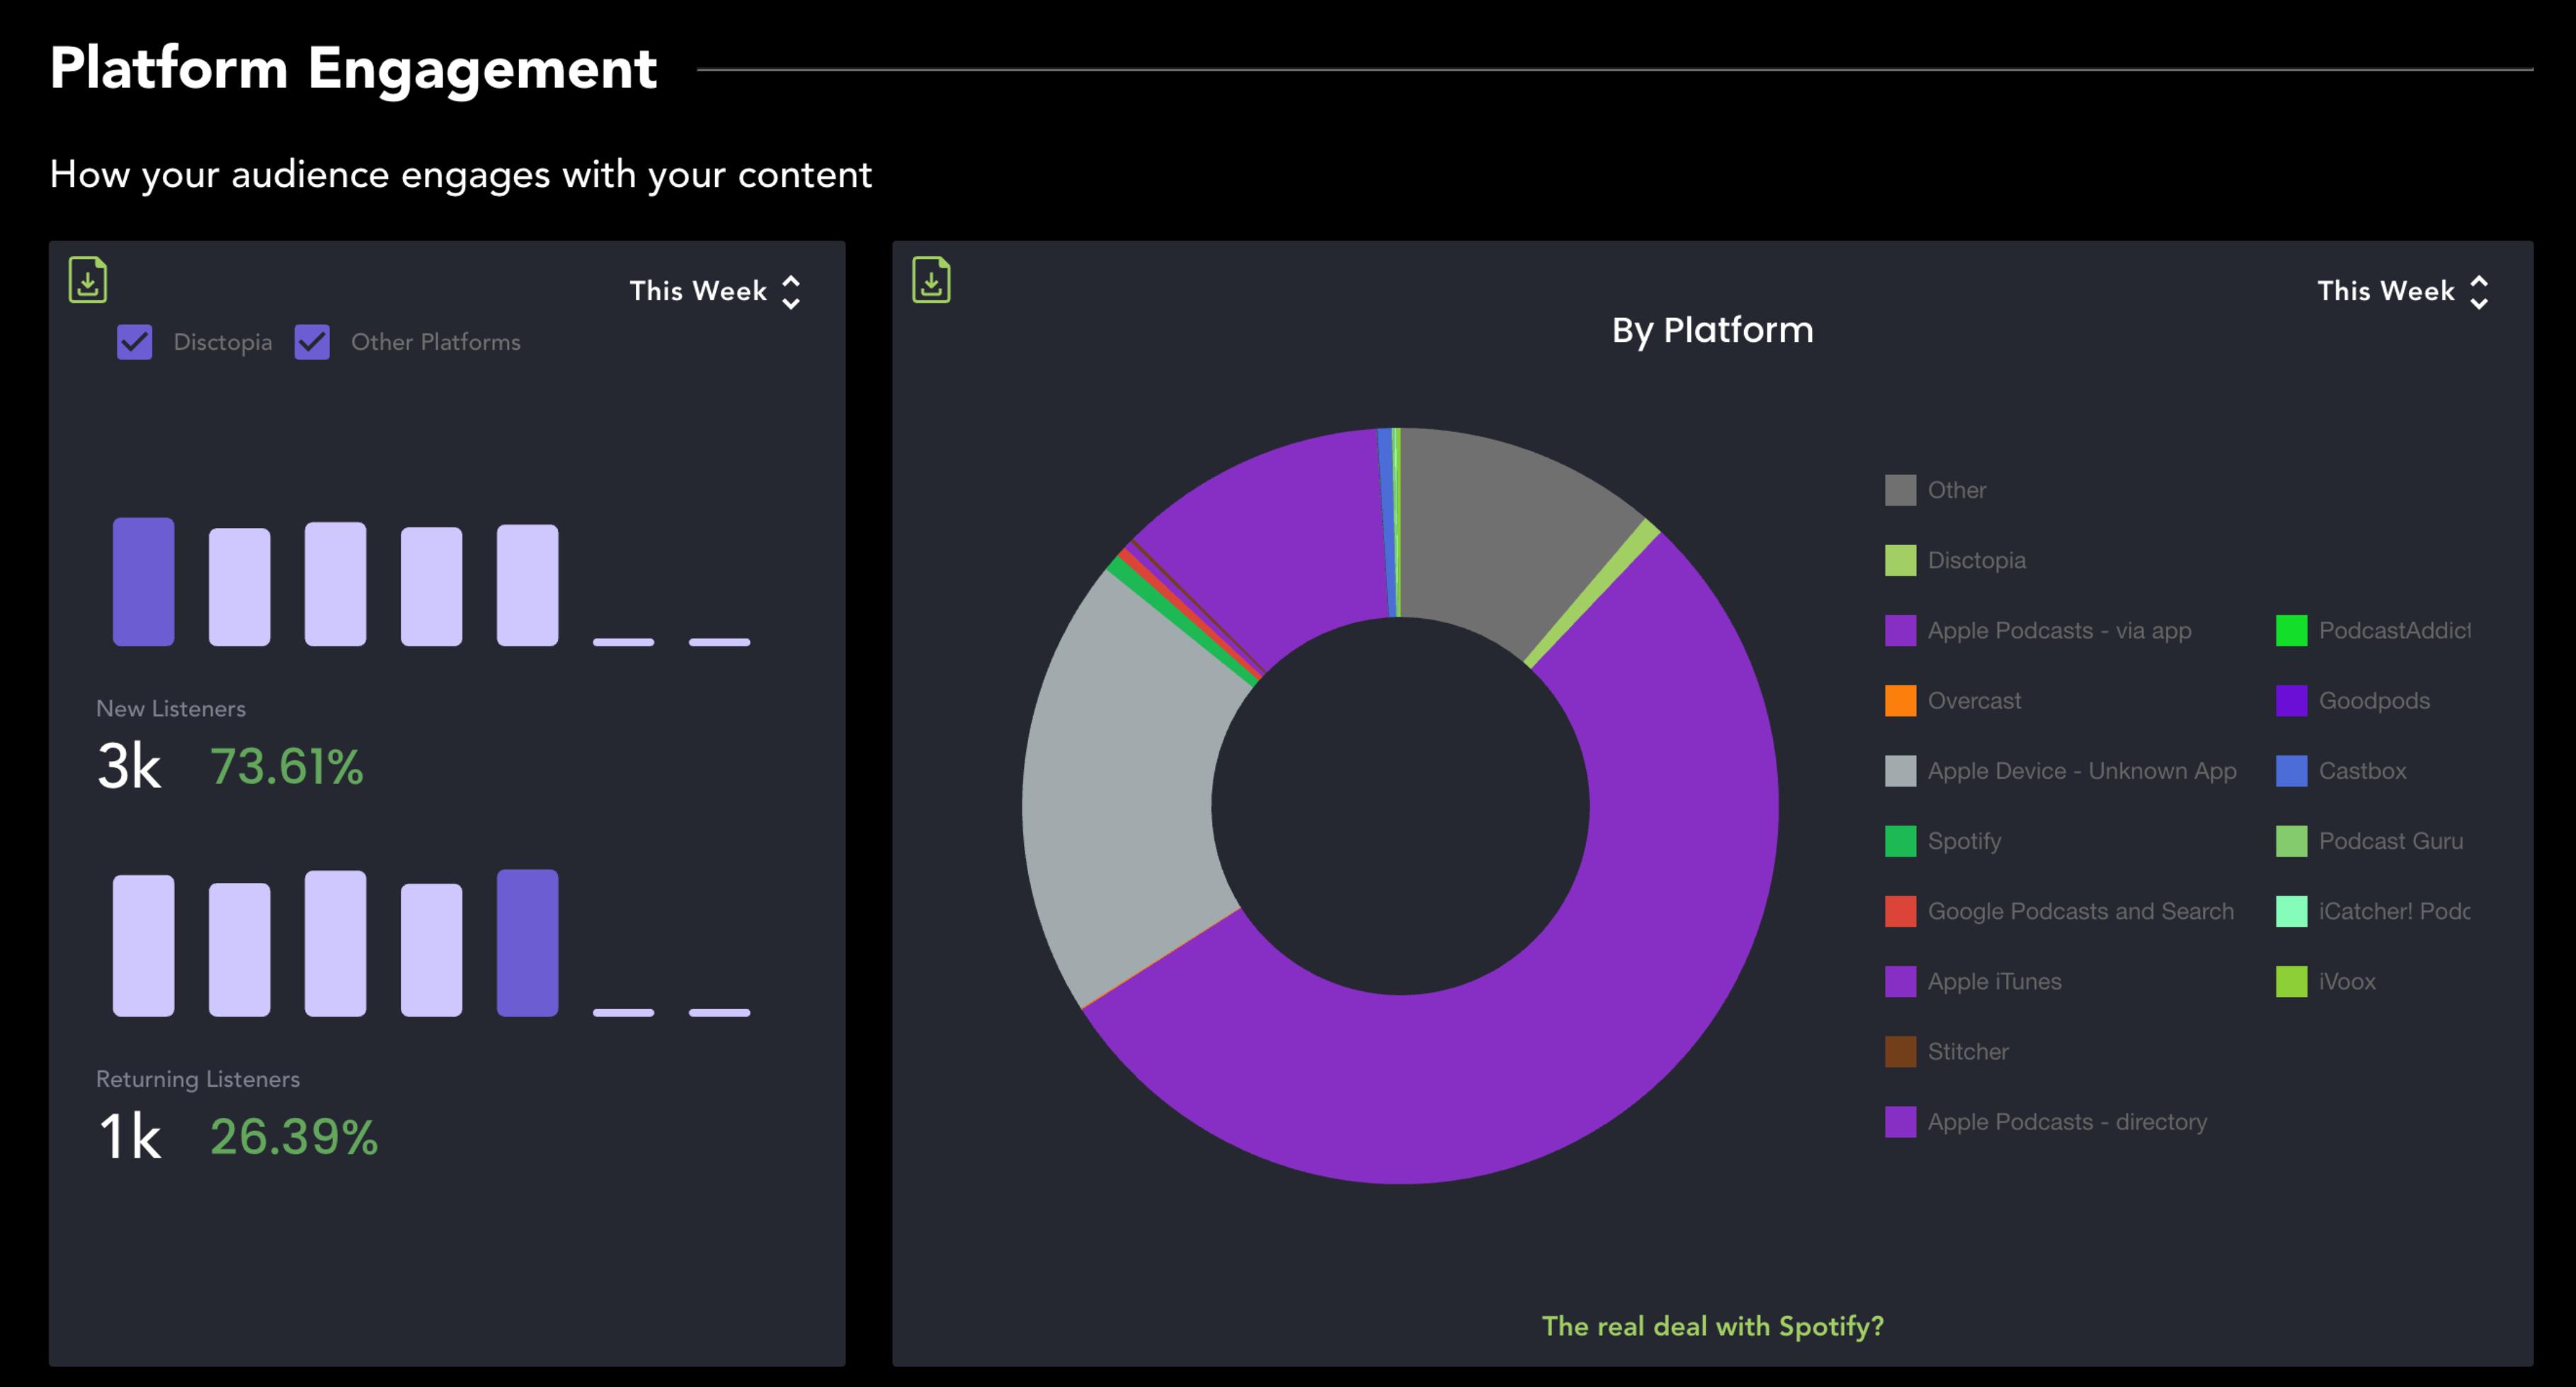 An example of Platform Engagement view.